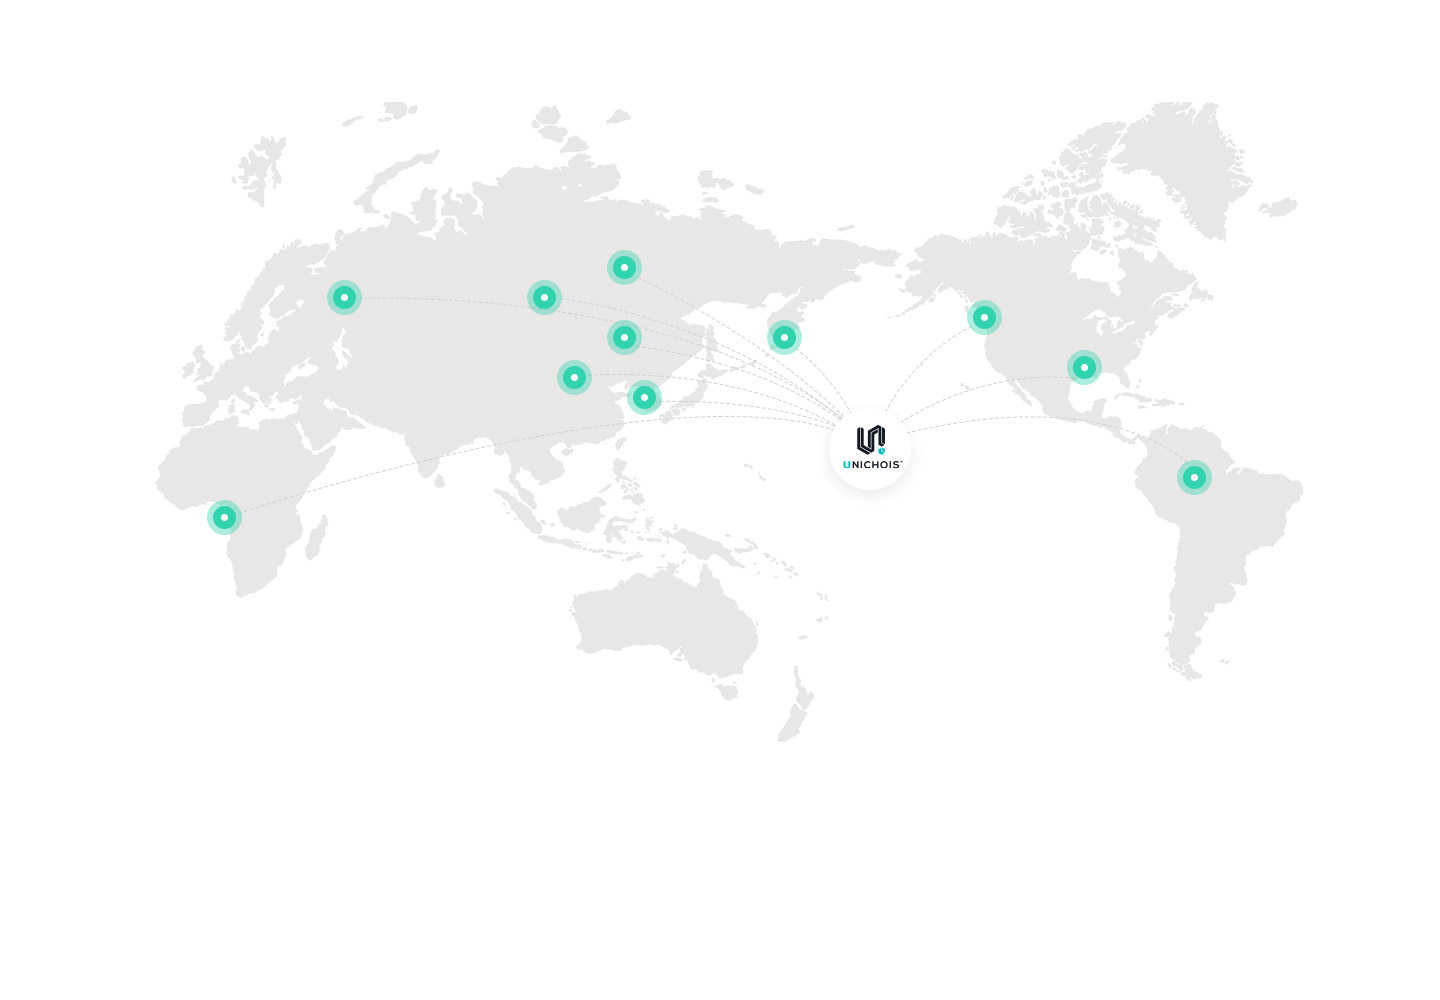 Our customers are located in<br> more than 20 countries around the world